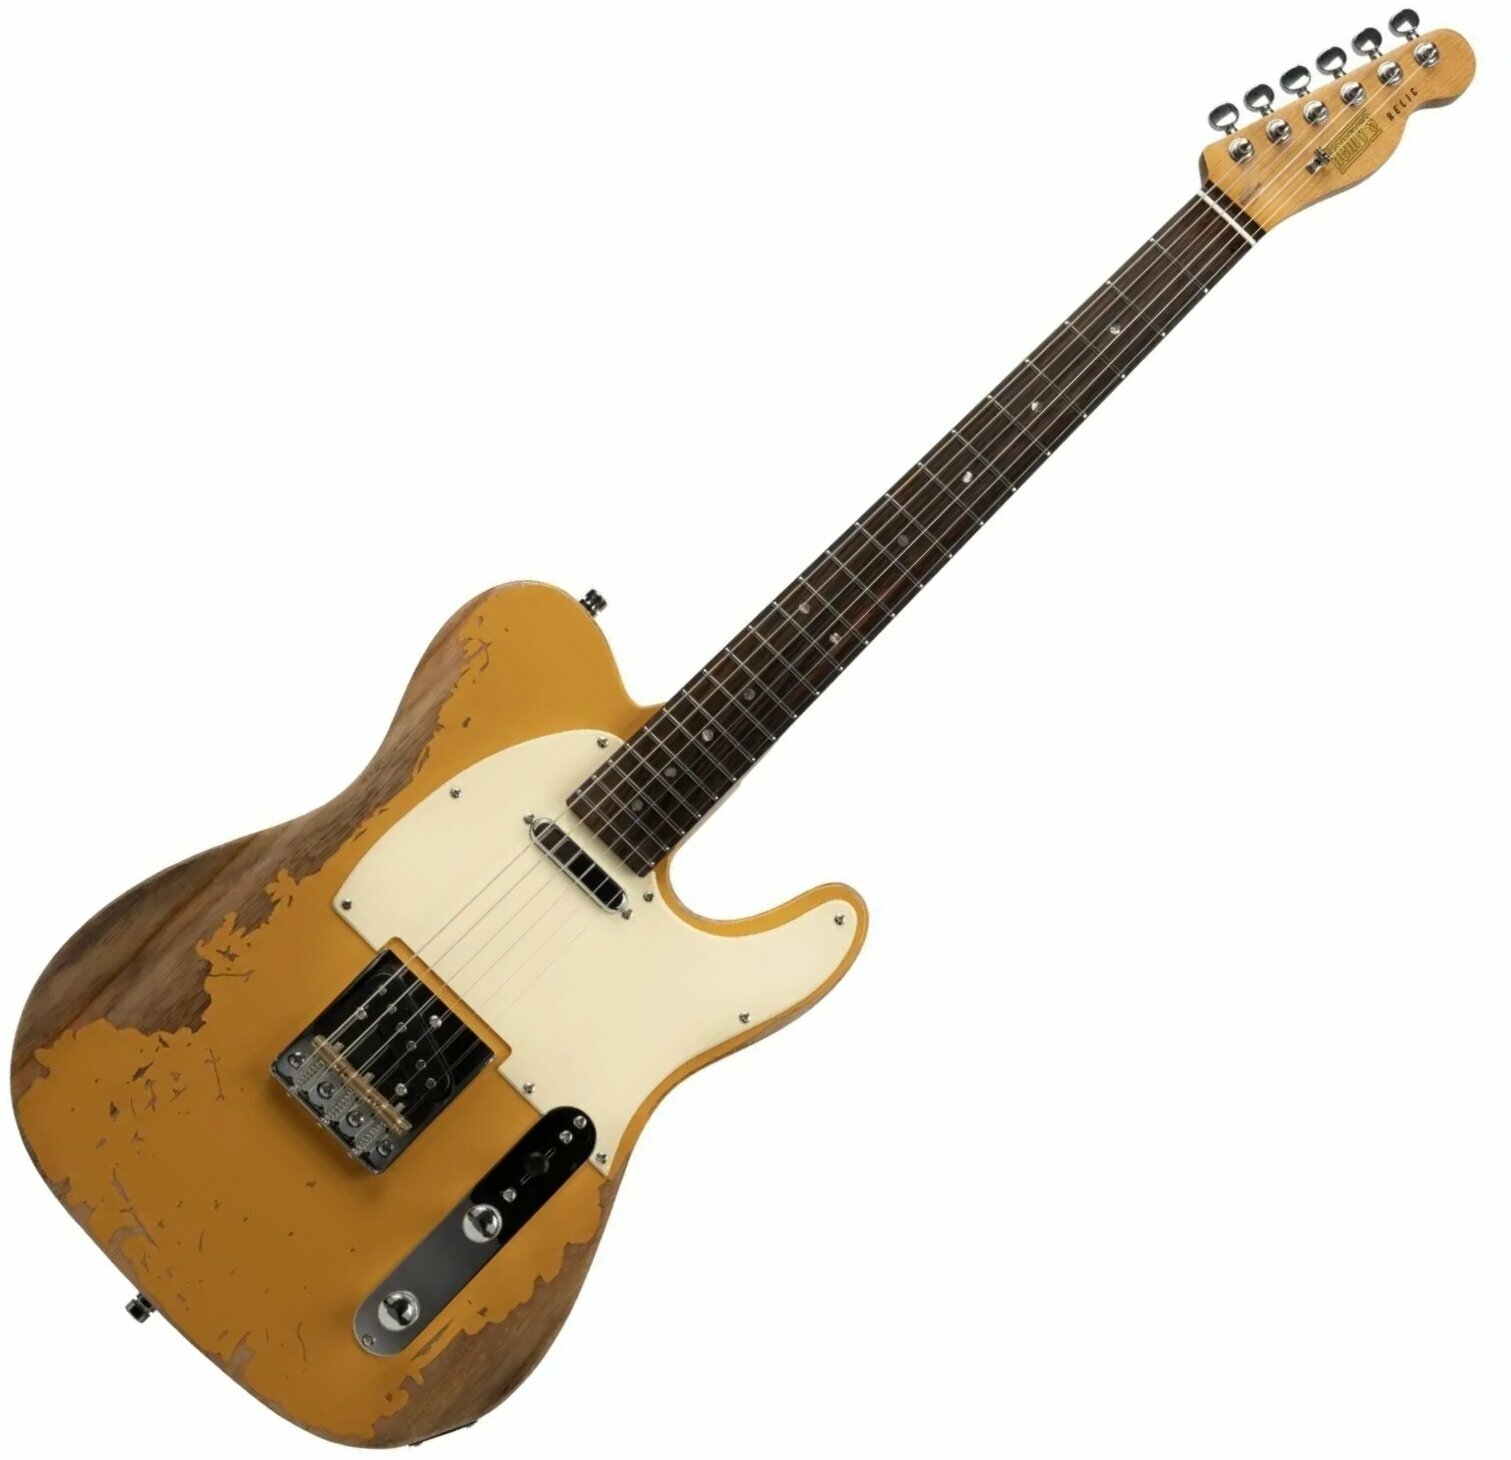 E-Gitarre Henry's TL-1 The Comet Yellow Relic